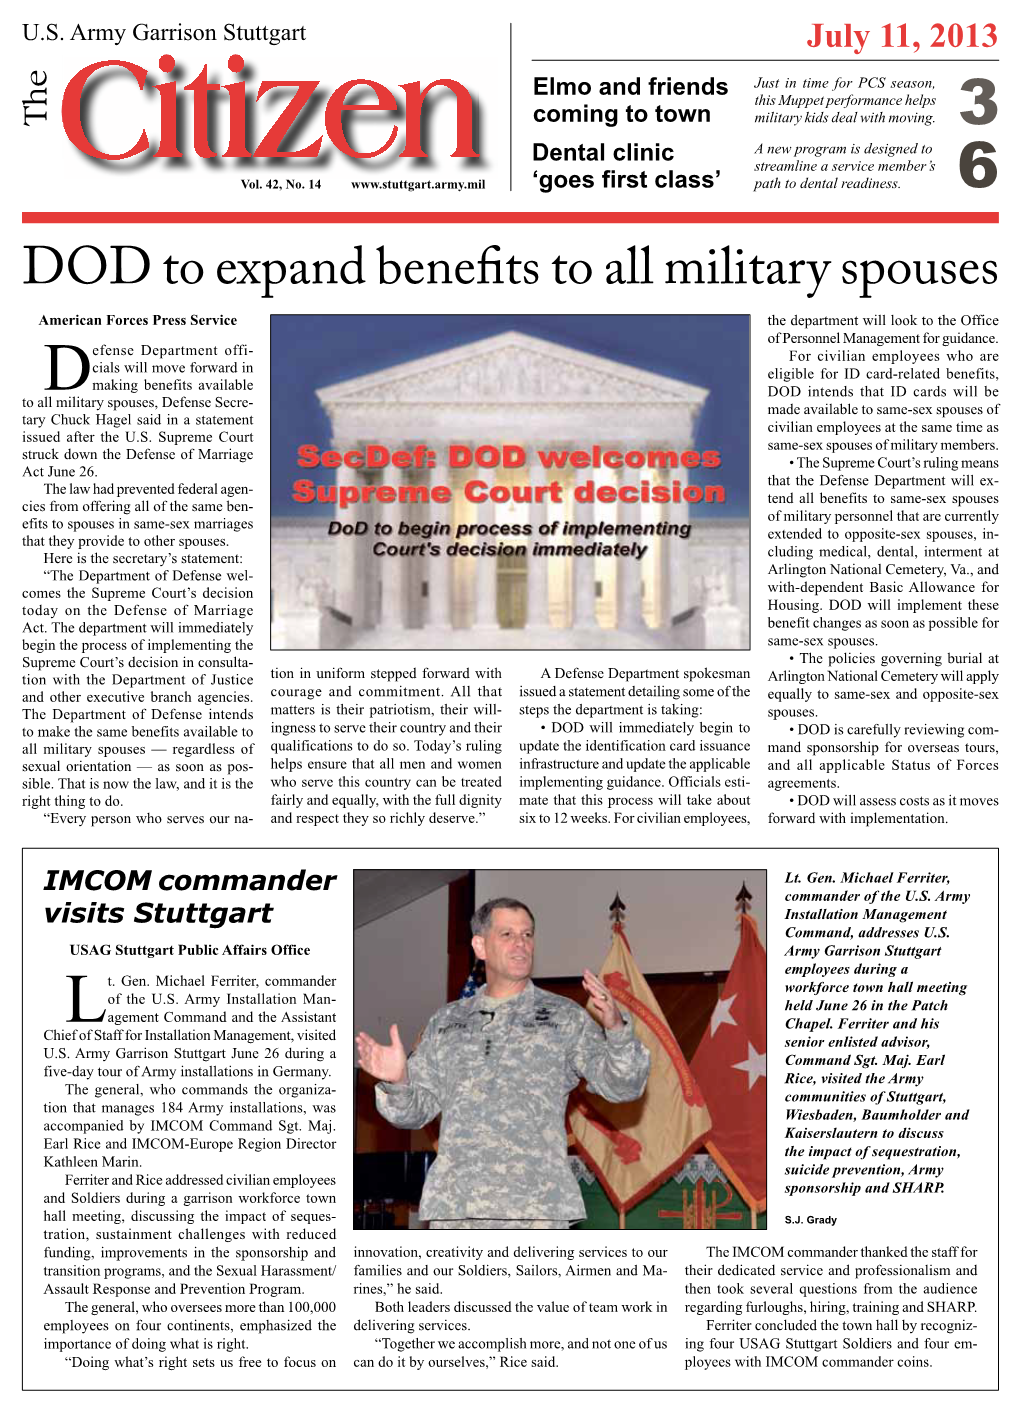 DOD to Expand Benefits to All Military Spouses American Forces Press Service the Department Will Look to the Office of Personnel Management for Guidance